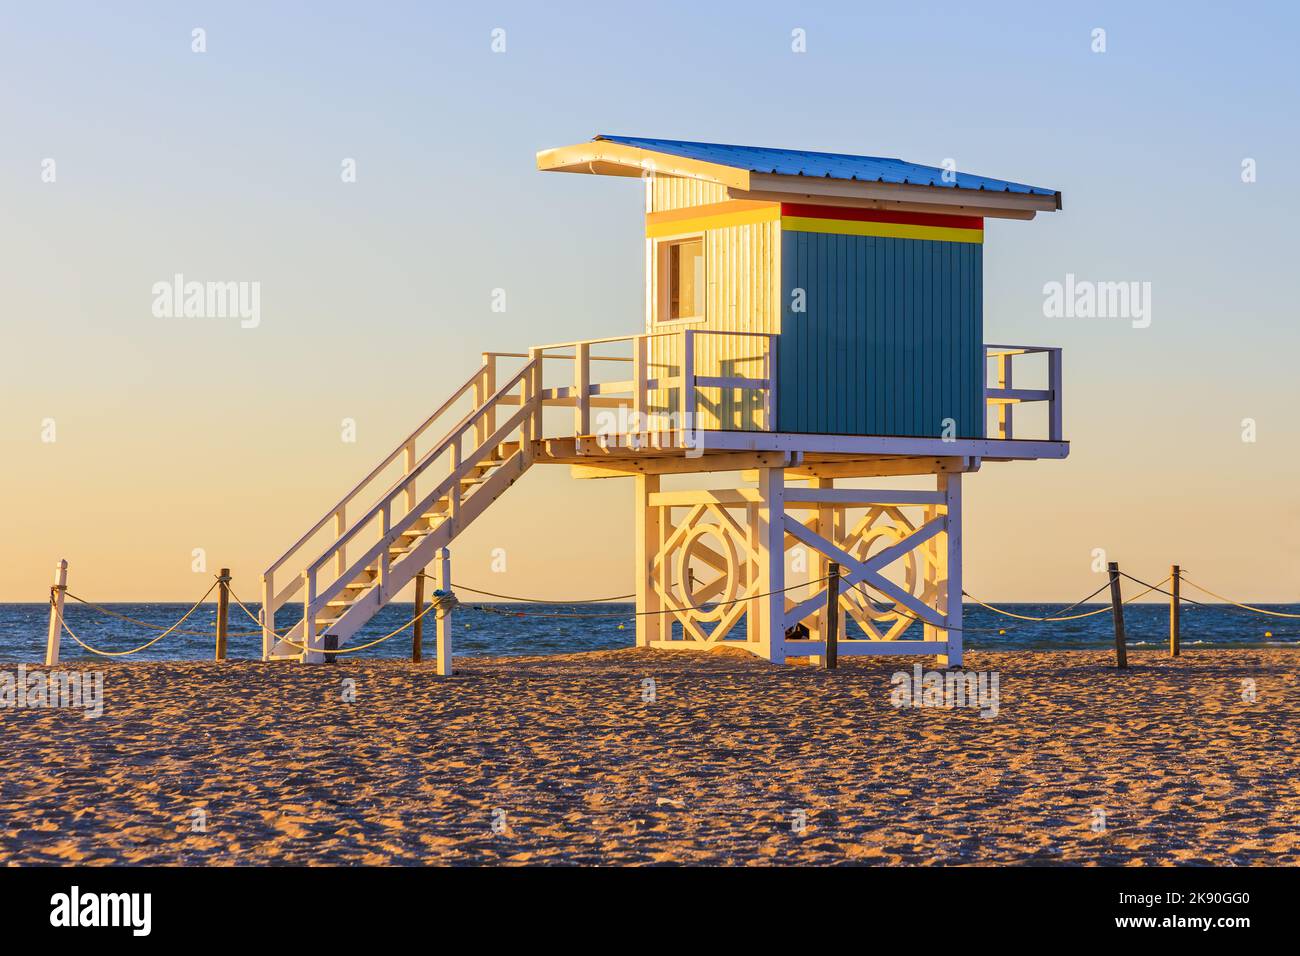 Deauville seaside resort. Beach and lifeguard house. Normandy, France. Stock Photo